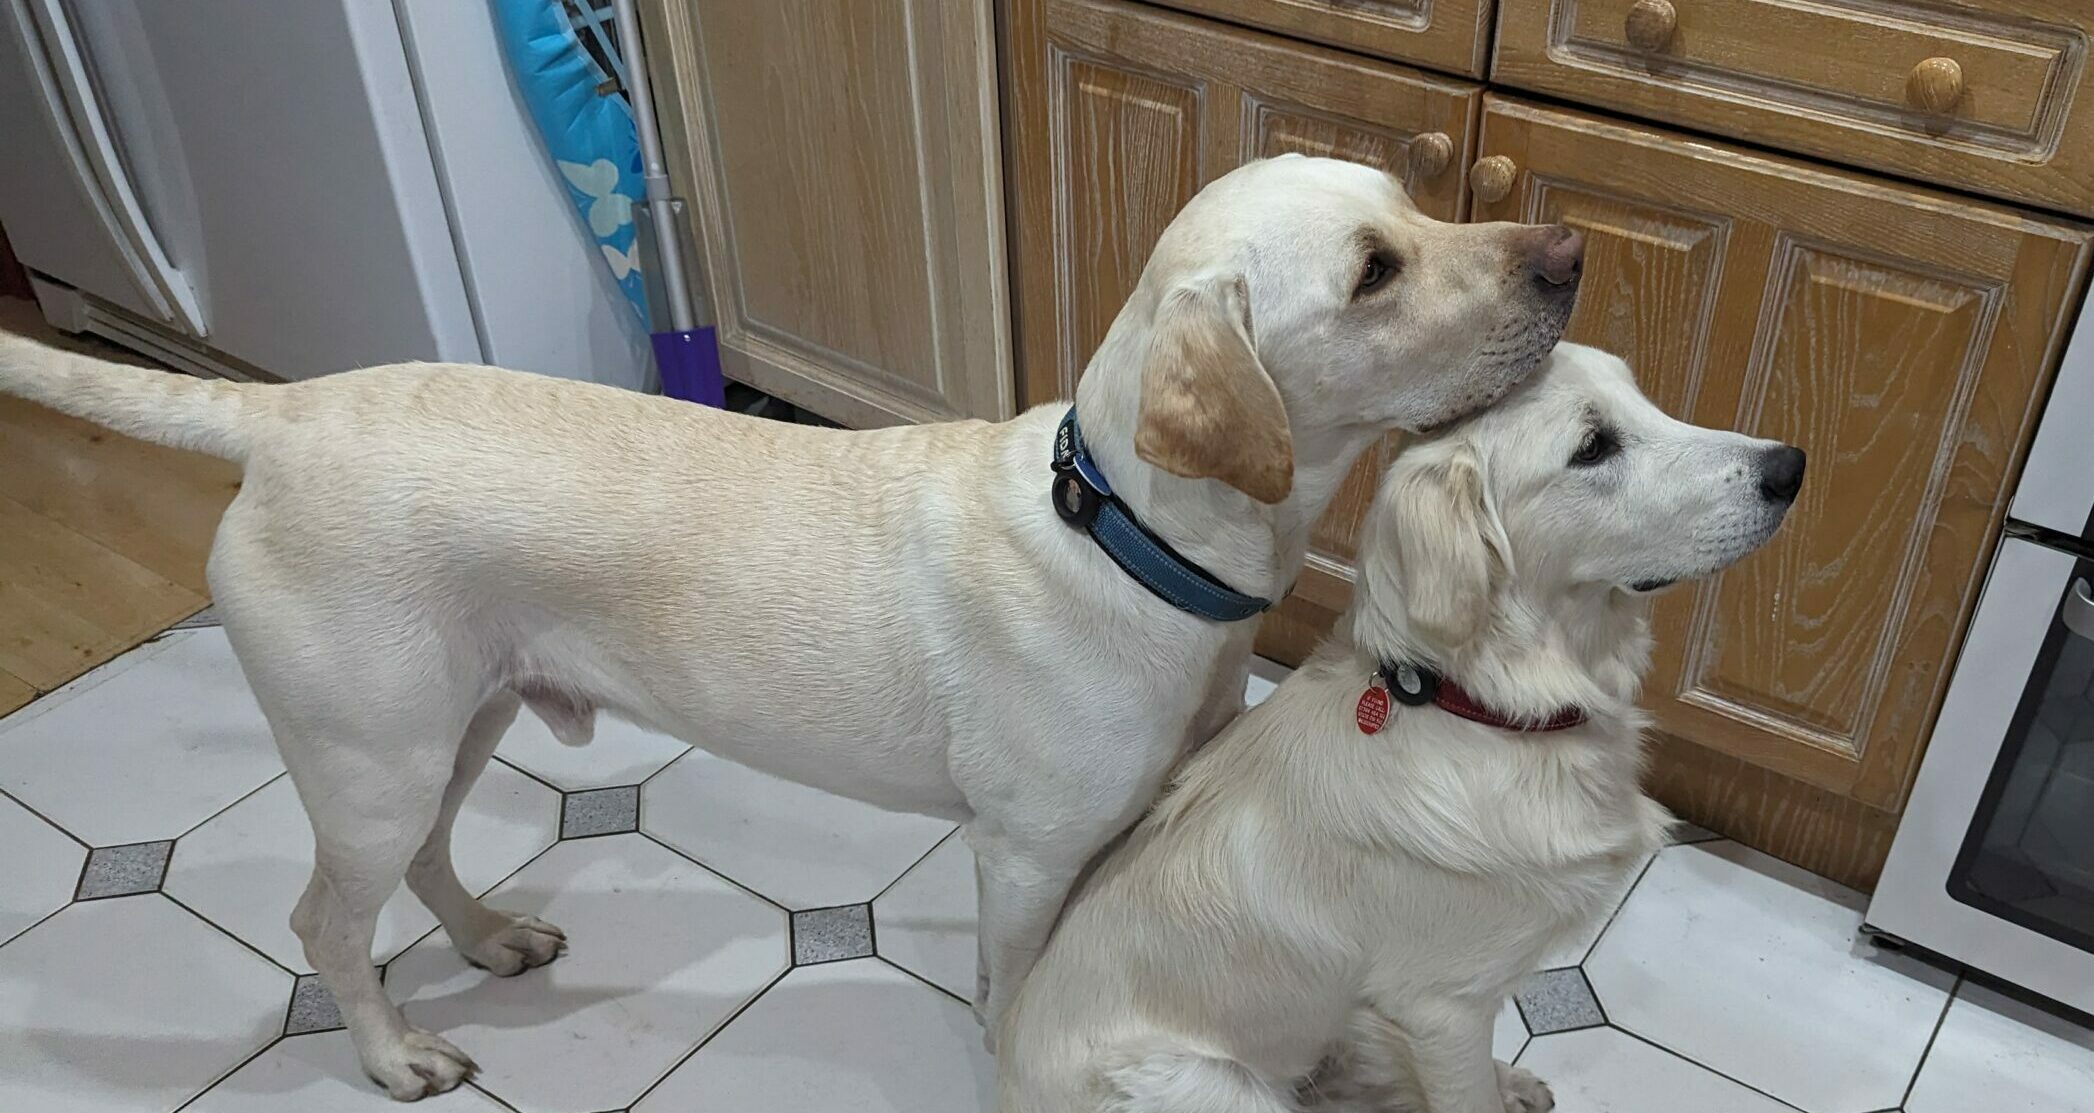 Two dogs - a labrador and a retriever. The labrador is resting his head on the head of the retriever.